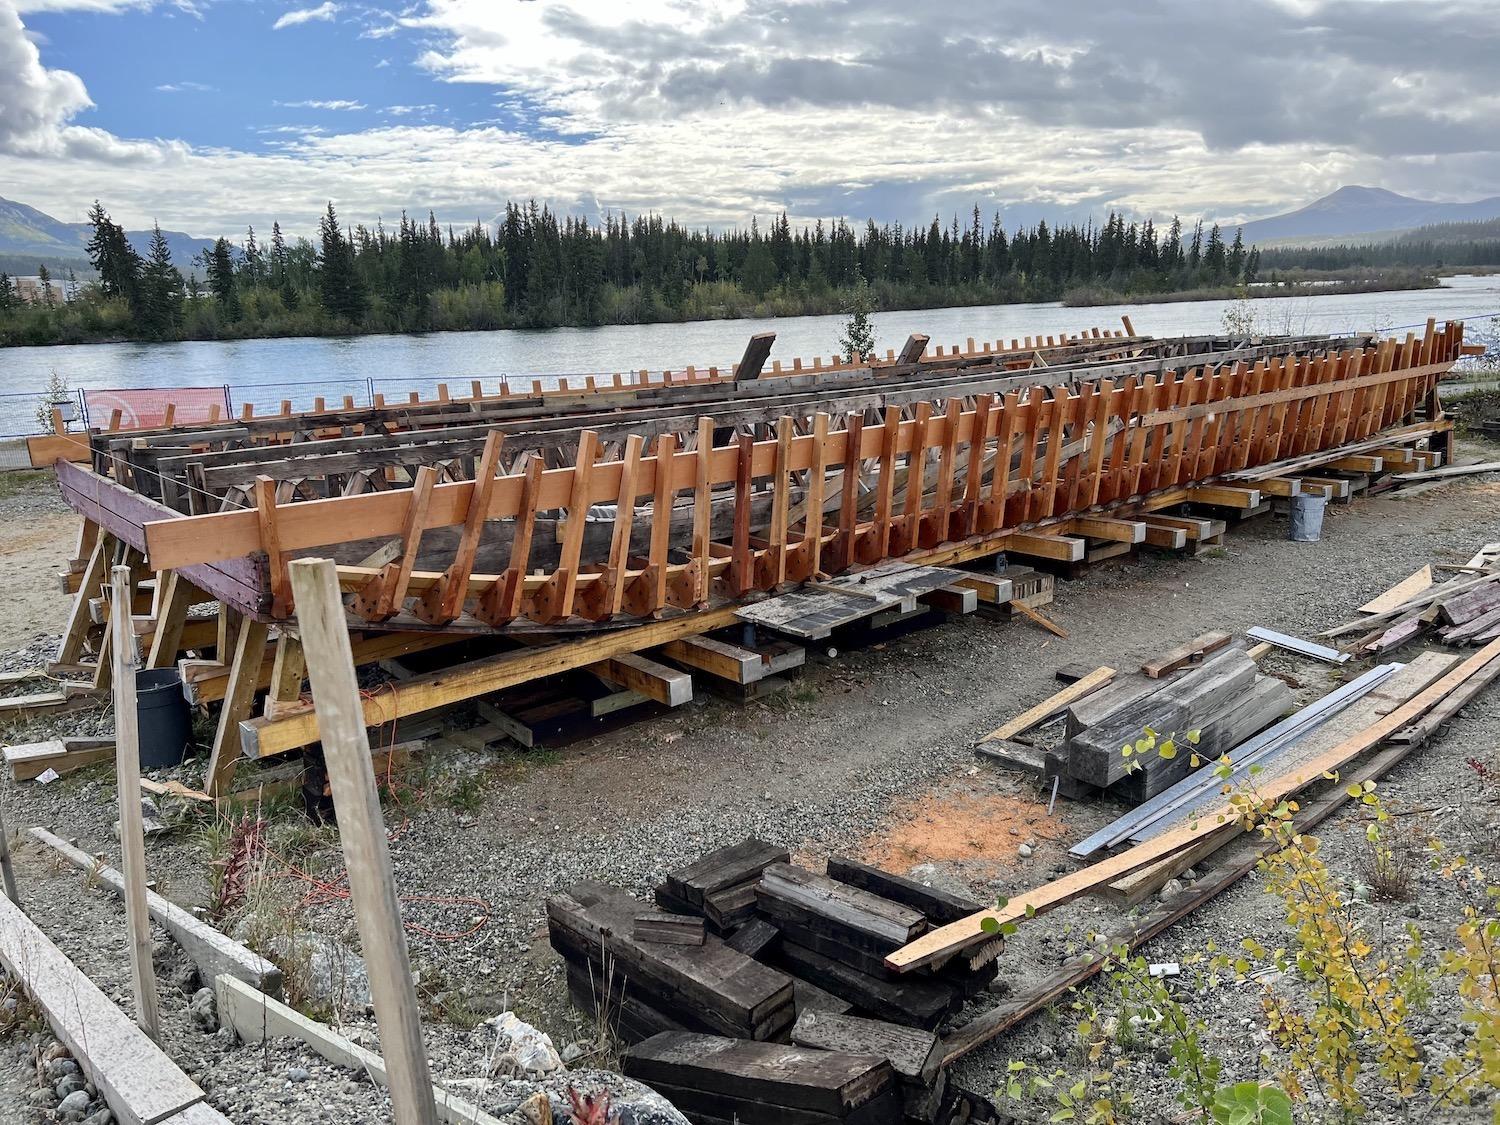 Shipwright Terry Karlsen and his crew are diligently rebuilding the Atlin Barge.